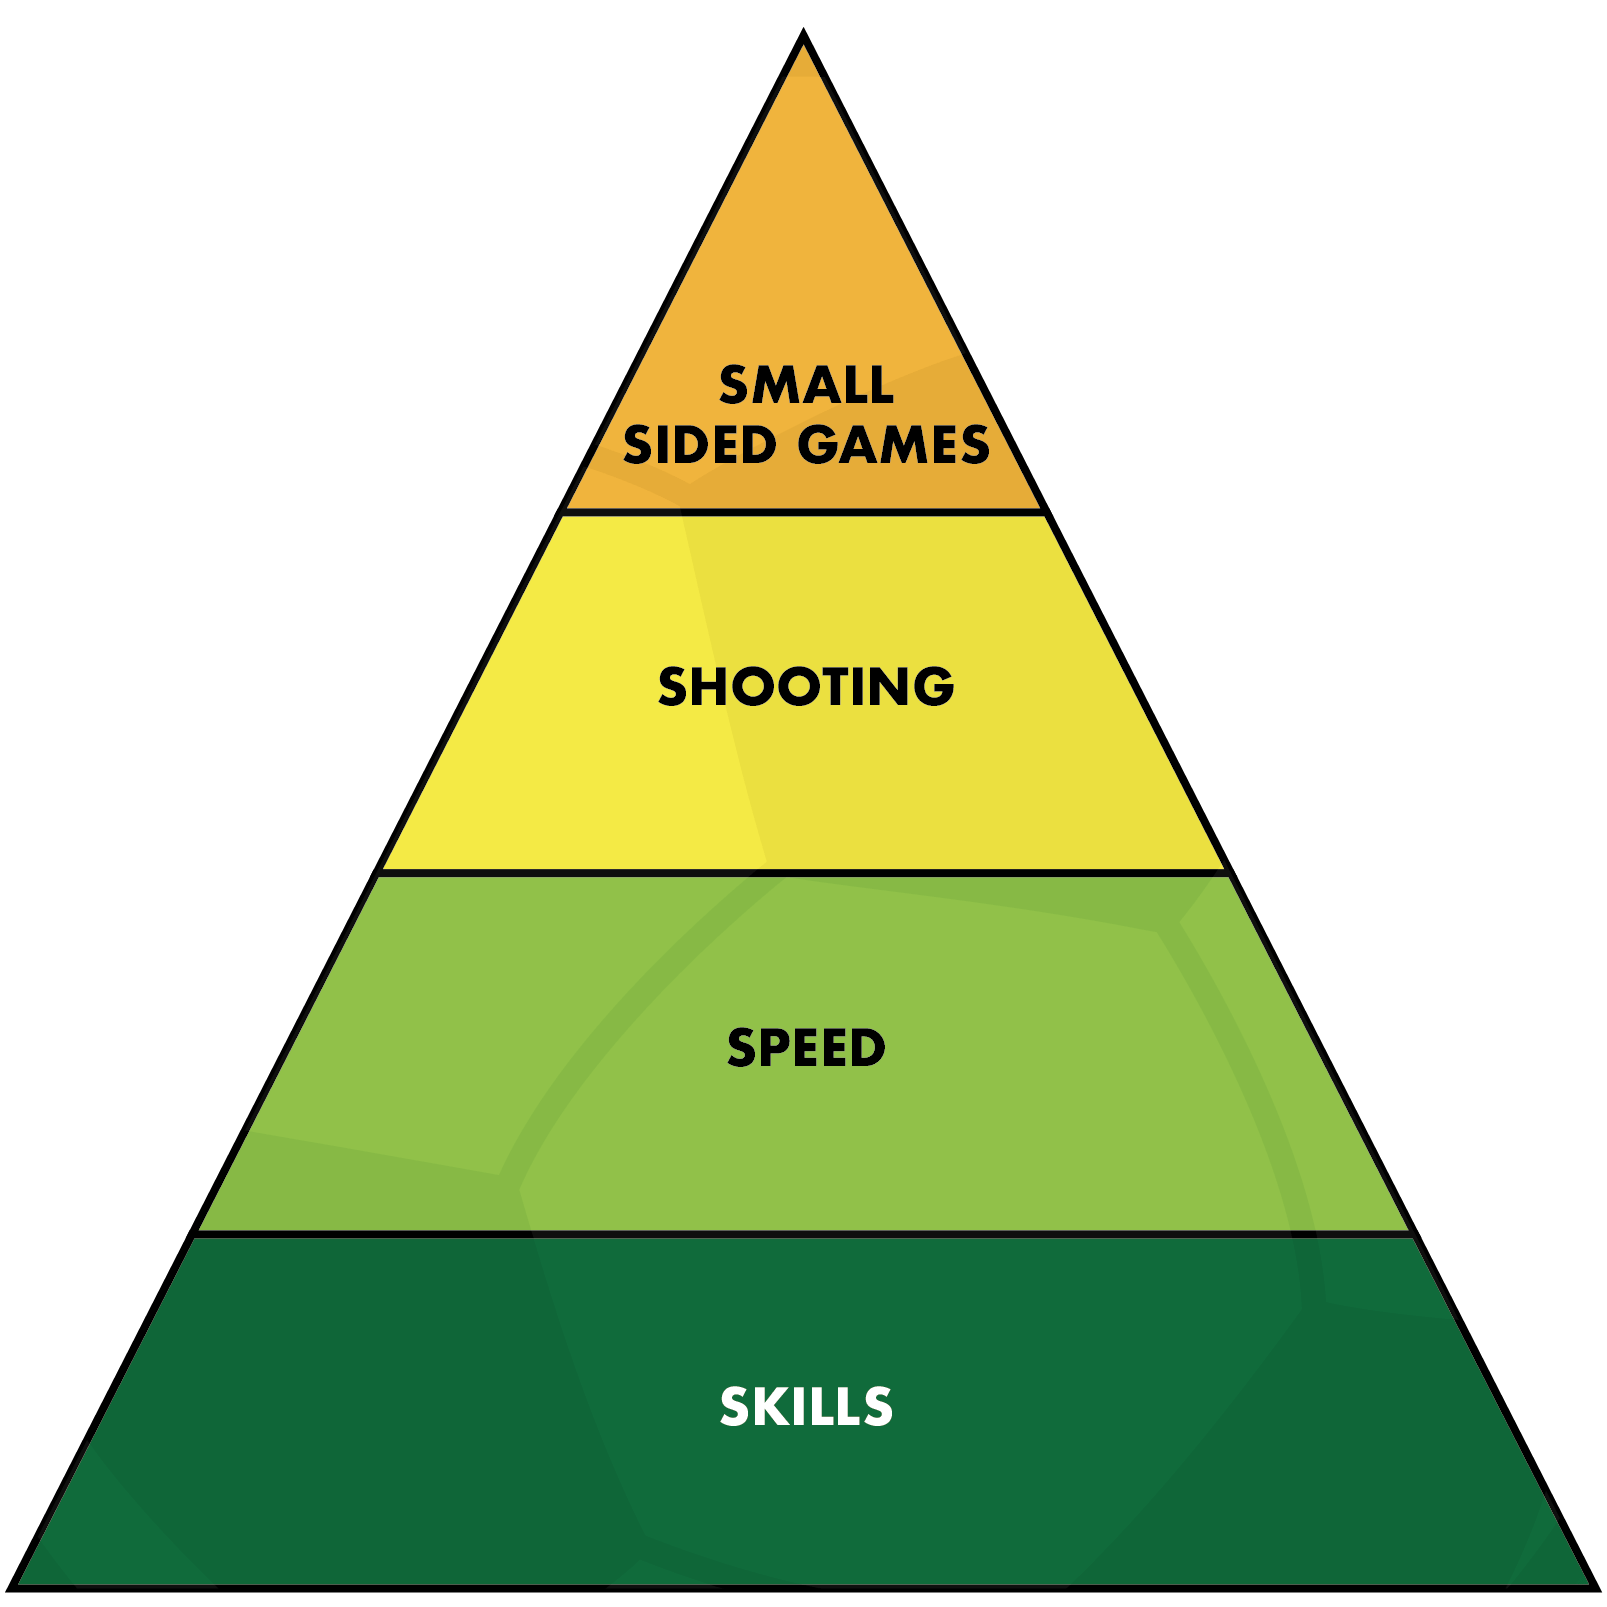 Programme Page – First Skills Pyramid 